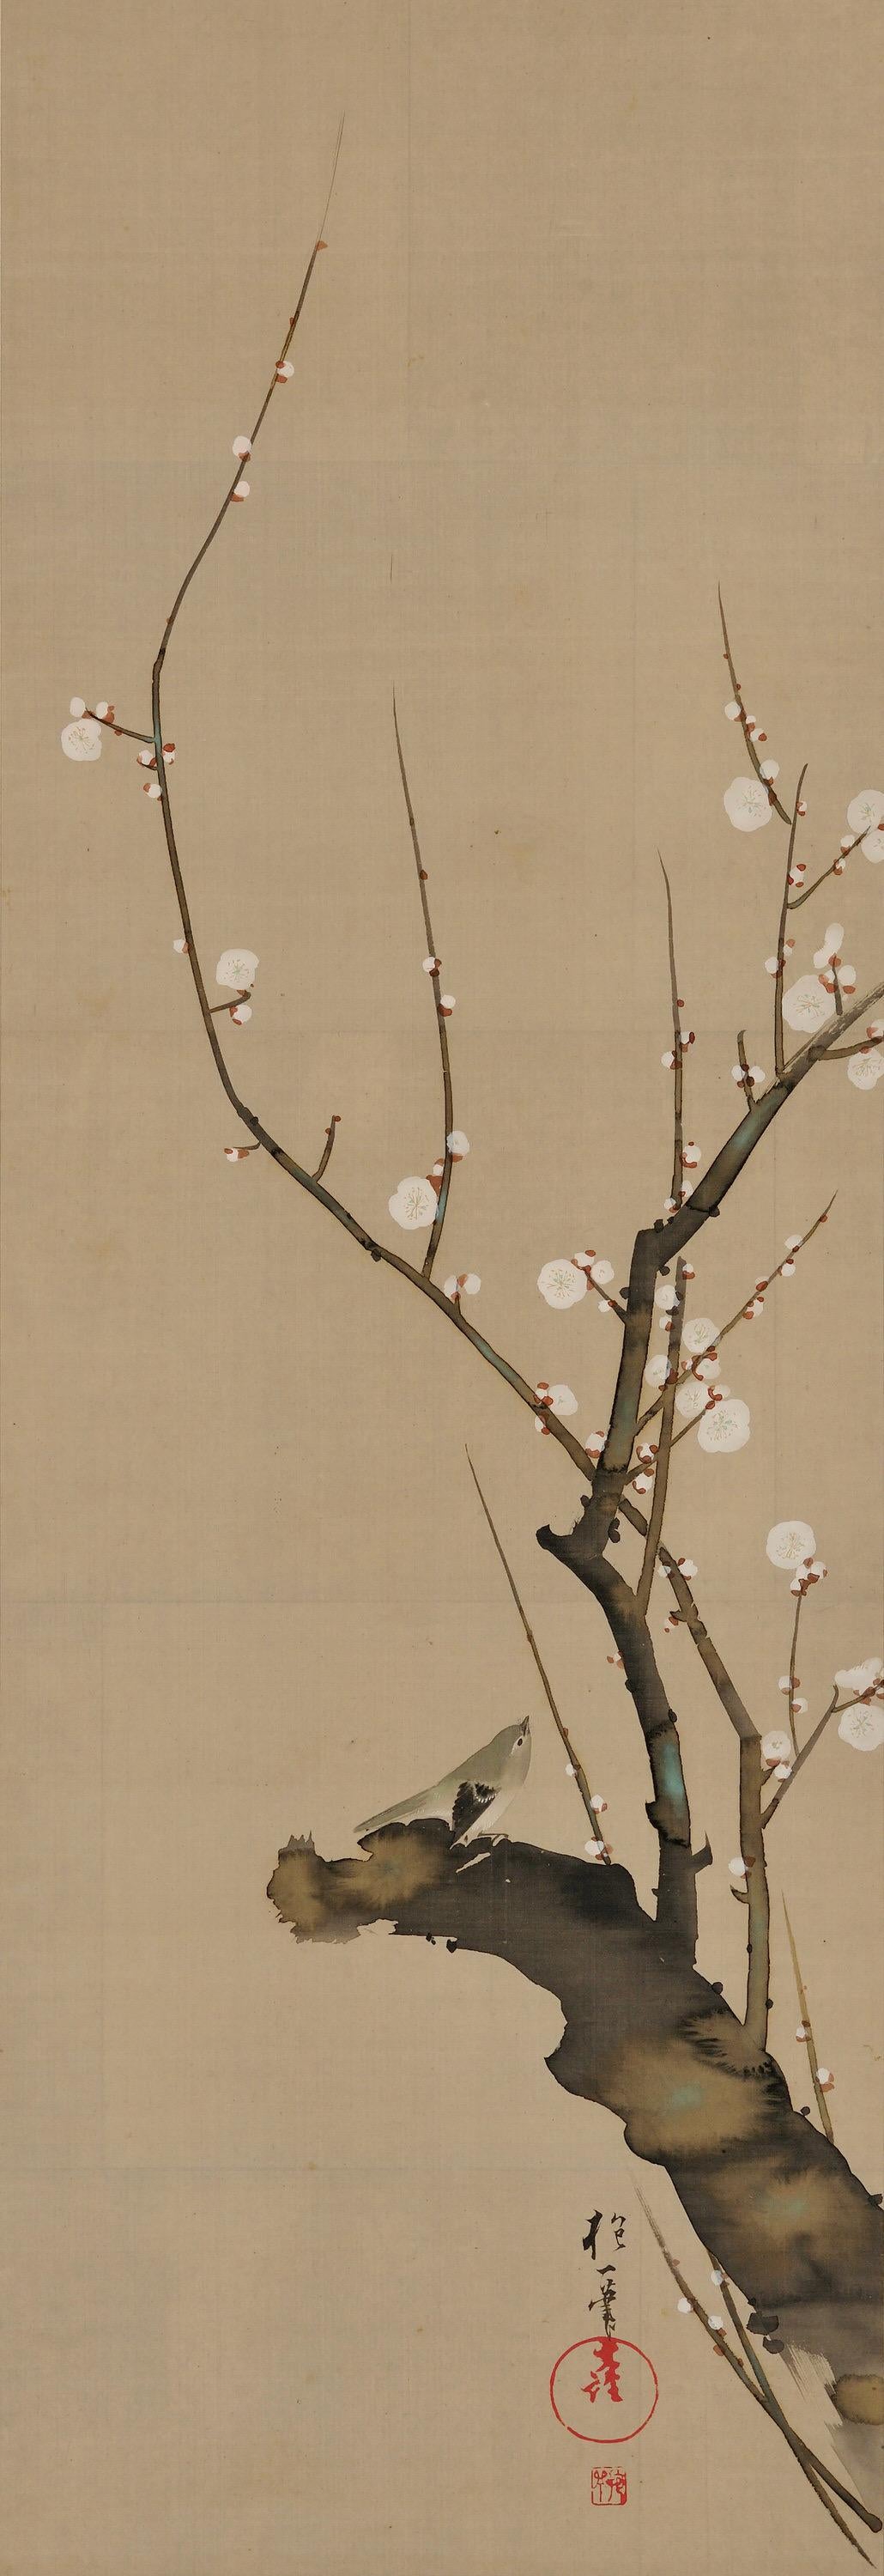 Bush Warbler in a plum tree and autumn grasses and full moon.

Sakai Hoitsu (1761-1828)

Early 19th century, Japan, Edo period.

Pair of hanging scrolls, ink and pigment on silk.

Signed: Hoitsu hitsu

Seals:
Upper - Bunsen
Lower -